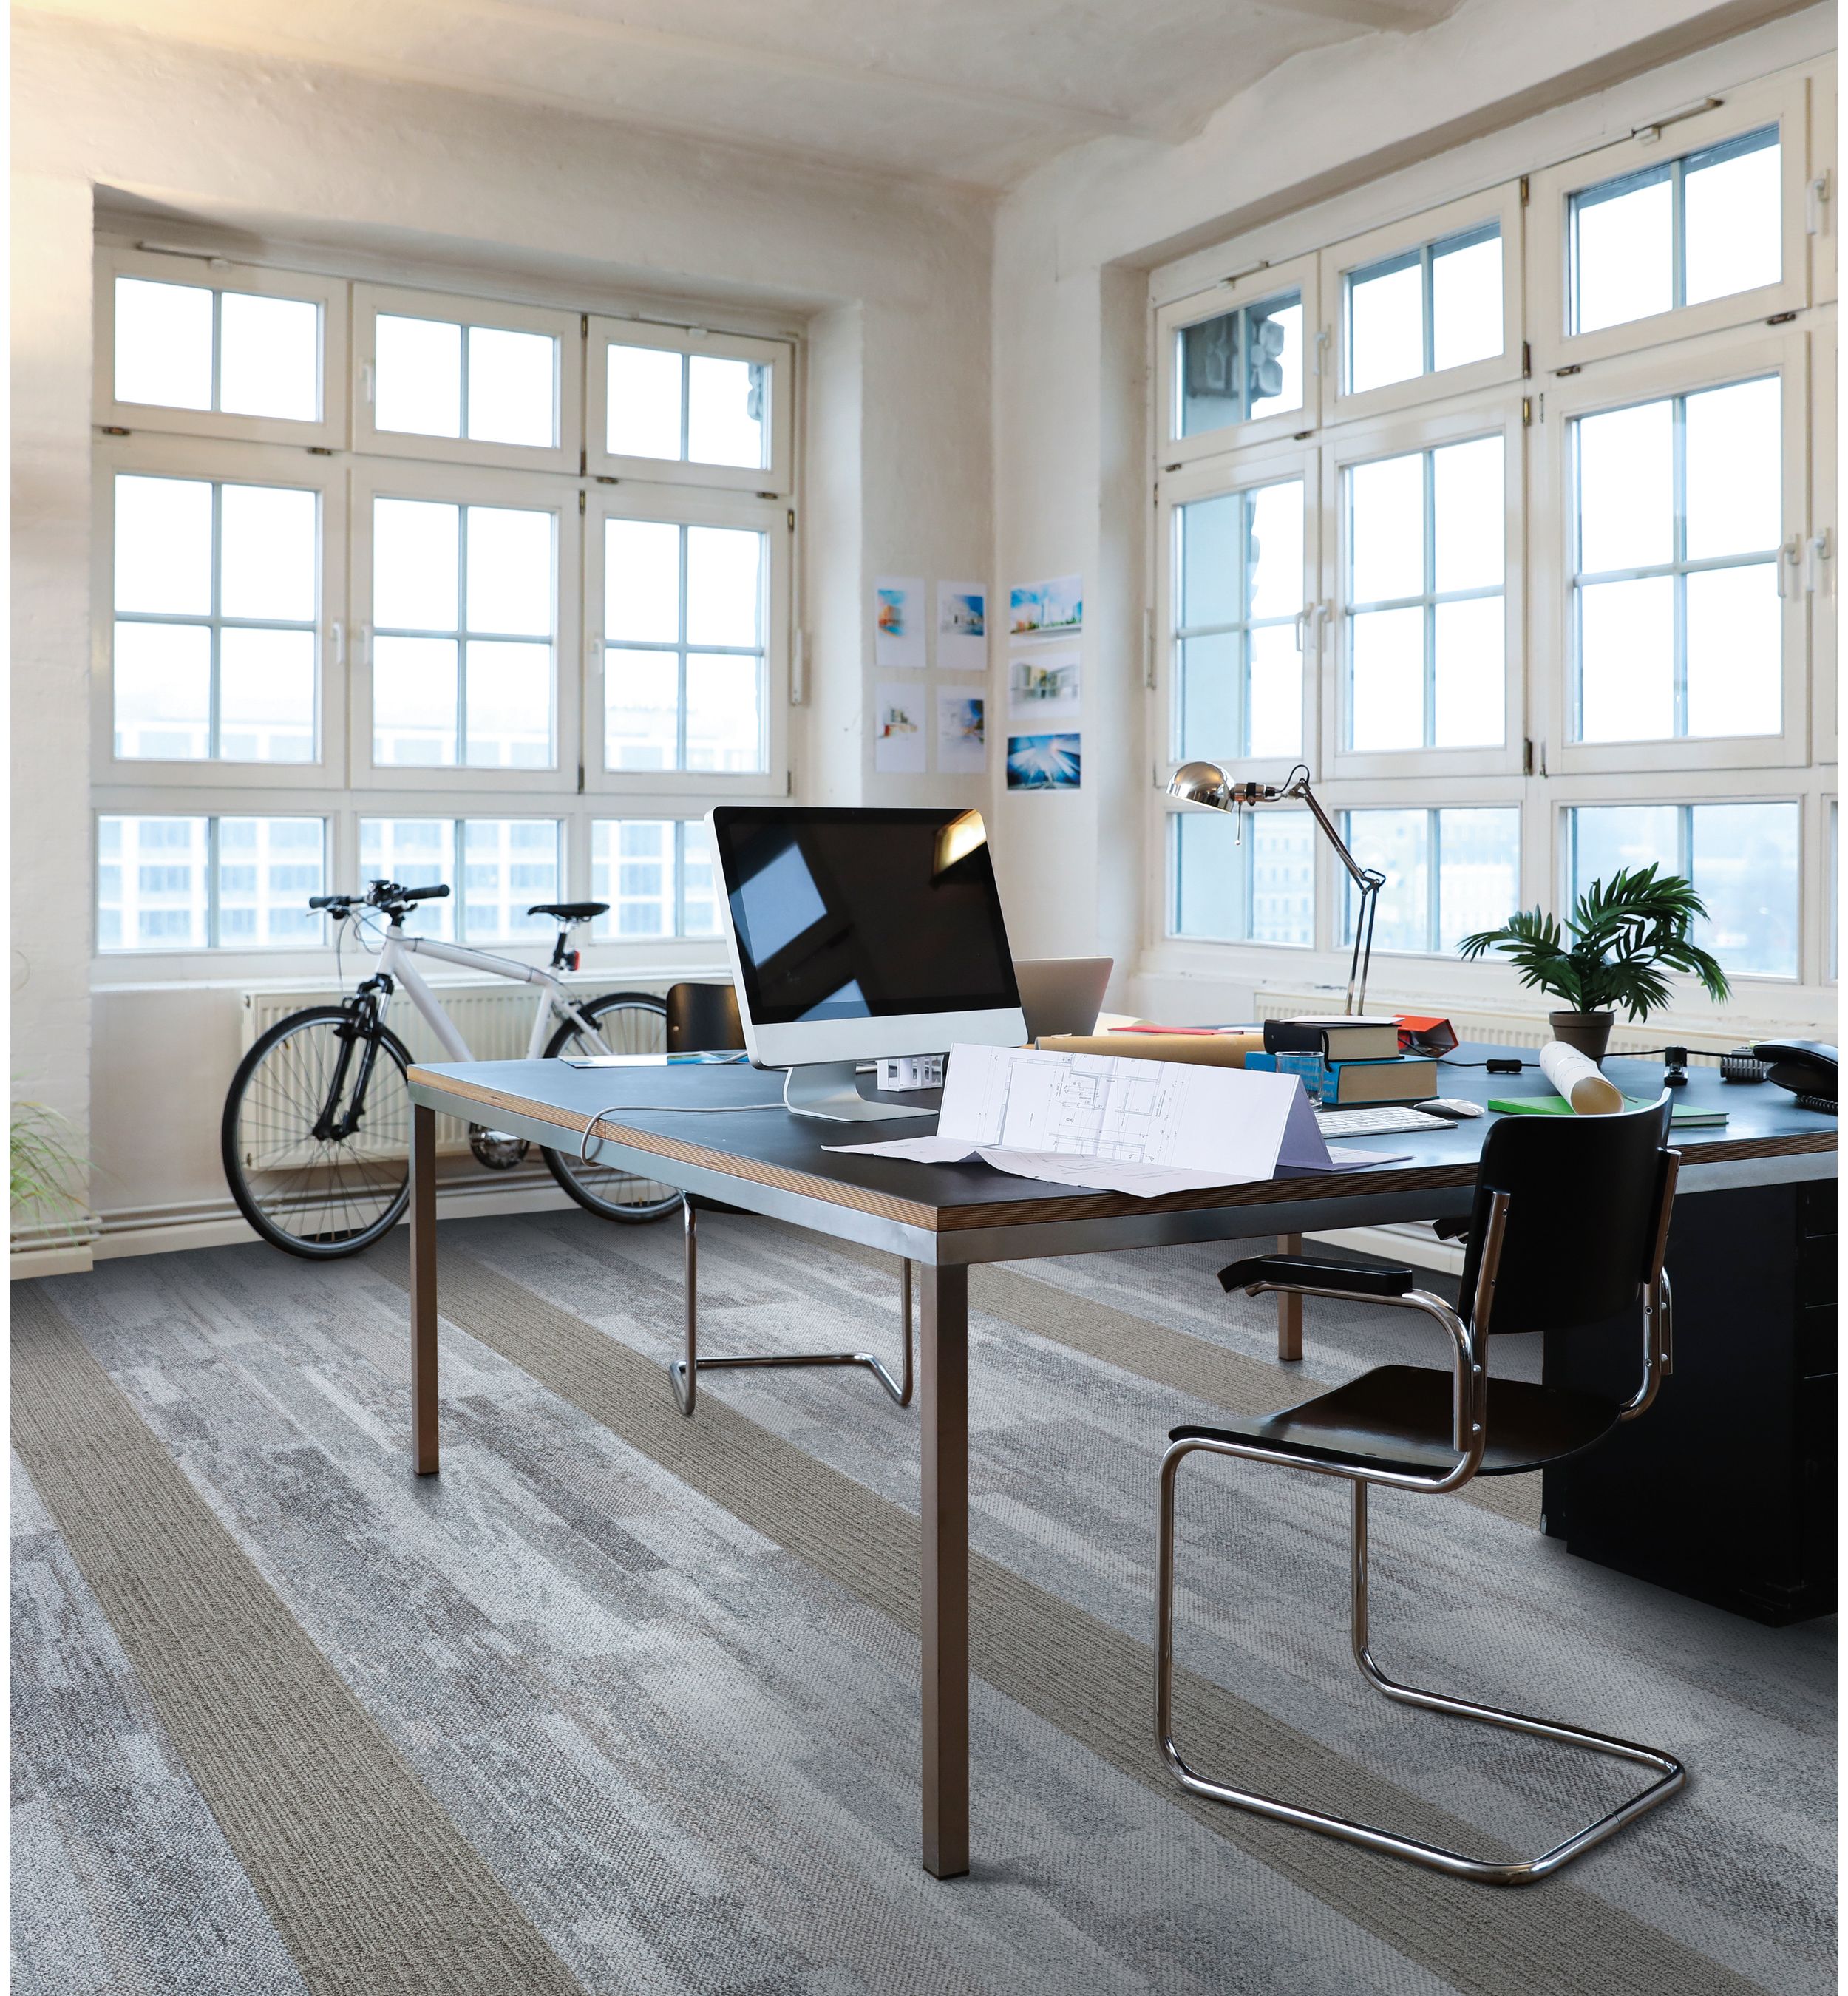 Interface Naturally Weathered and On Line plank carpet tile in office with desk and bike imagen número 5